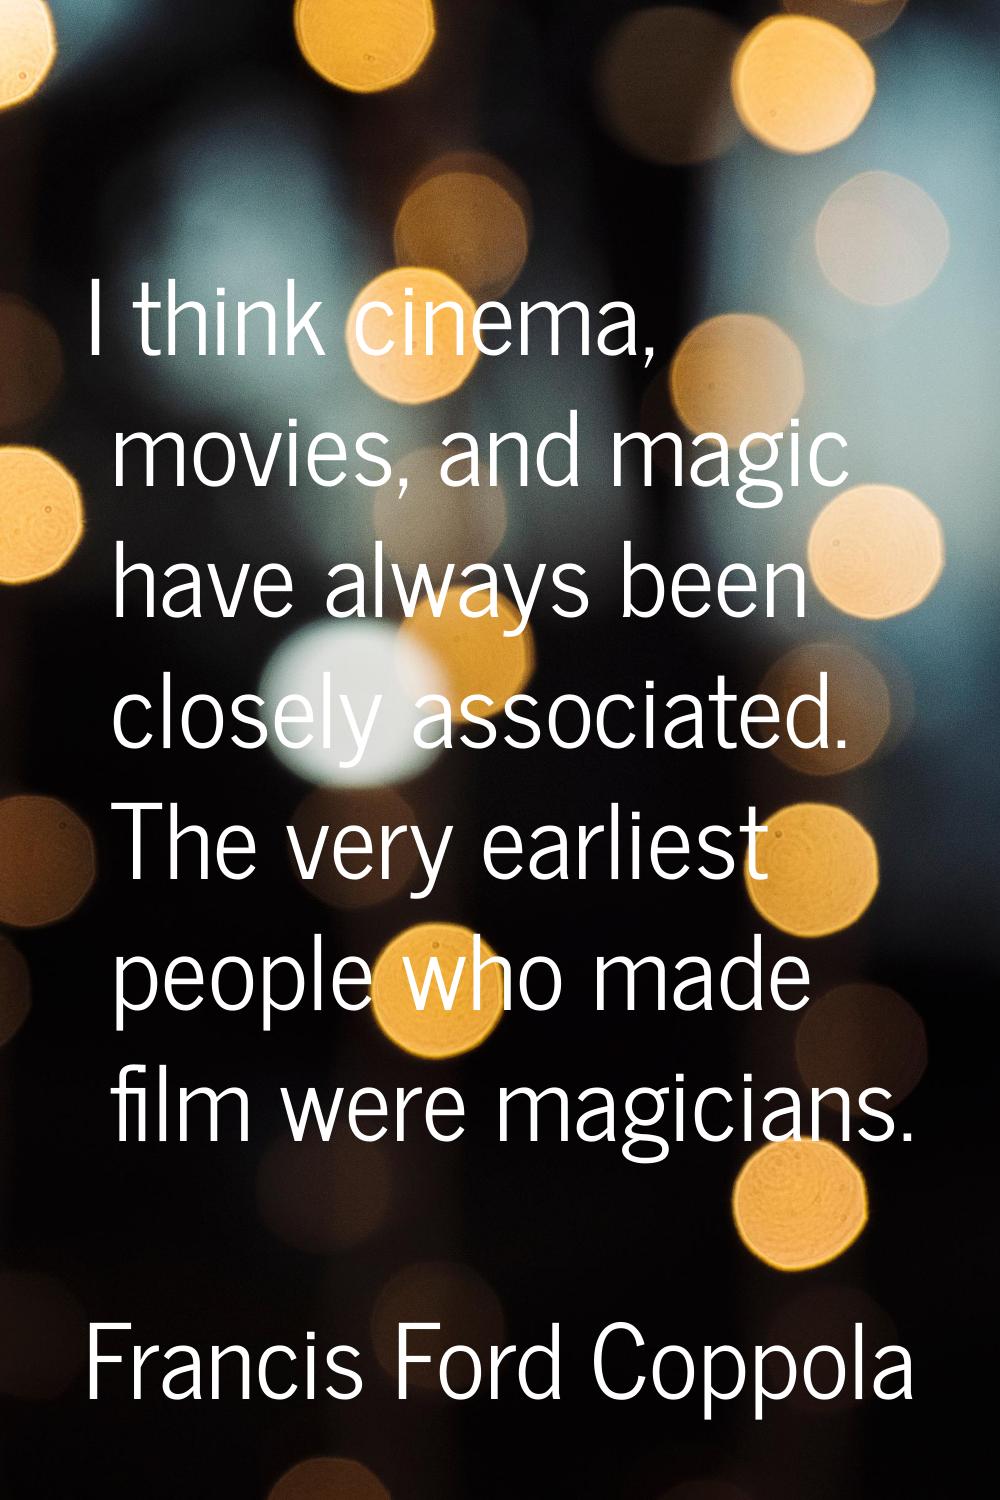 I think cinema, movies, and magic have always been closely associated. The very earliest people who